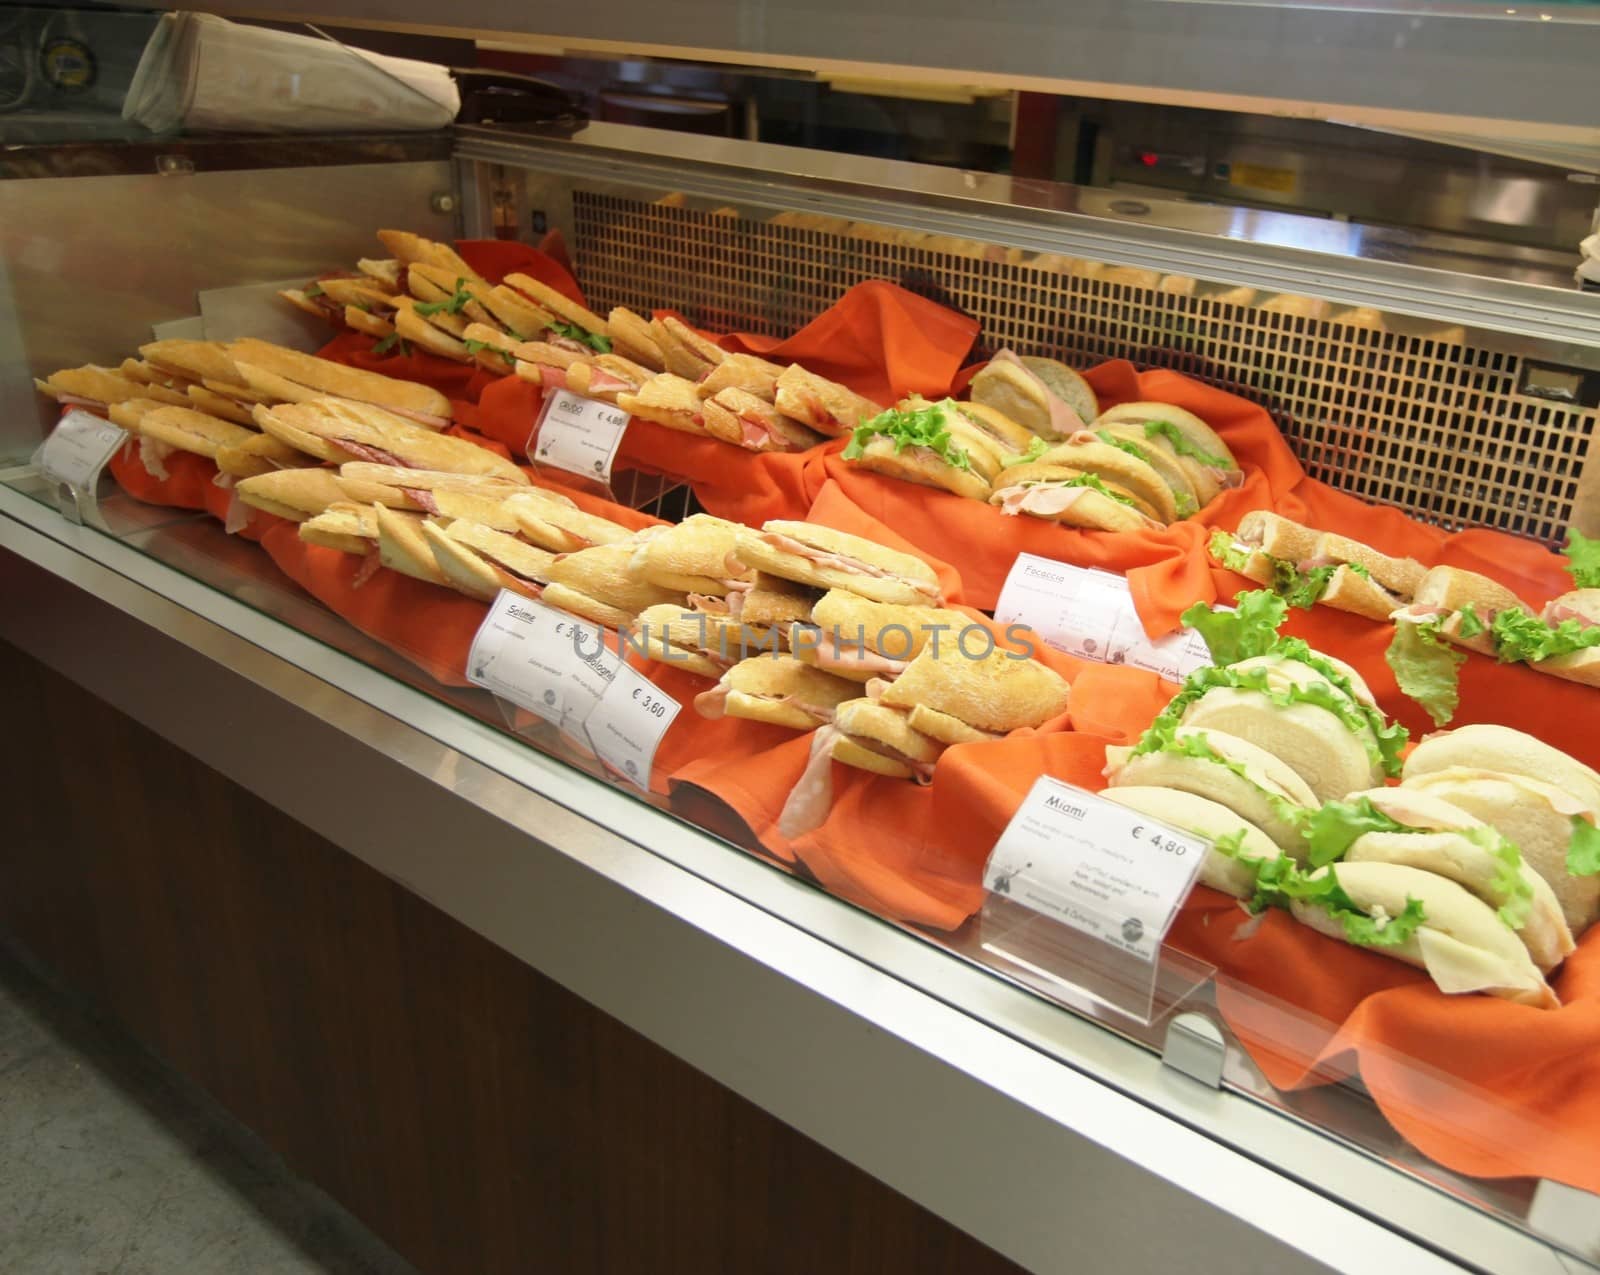 Sandwiches at Tuttofood 2013, Milano World Food Exhibition.